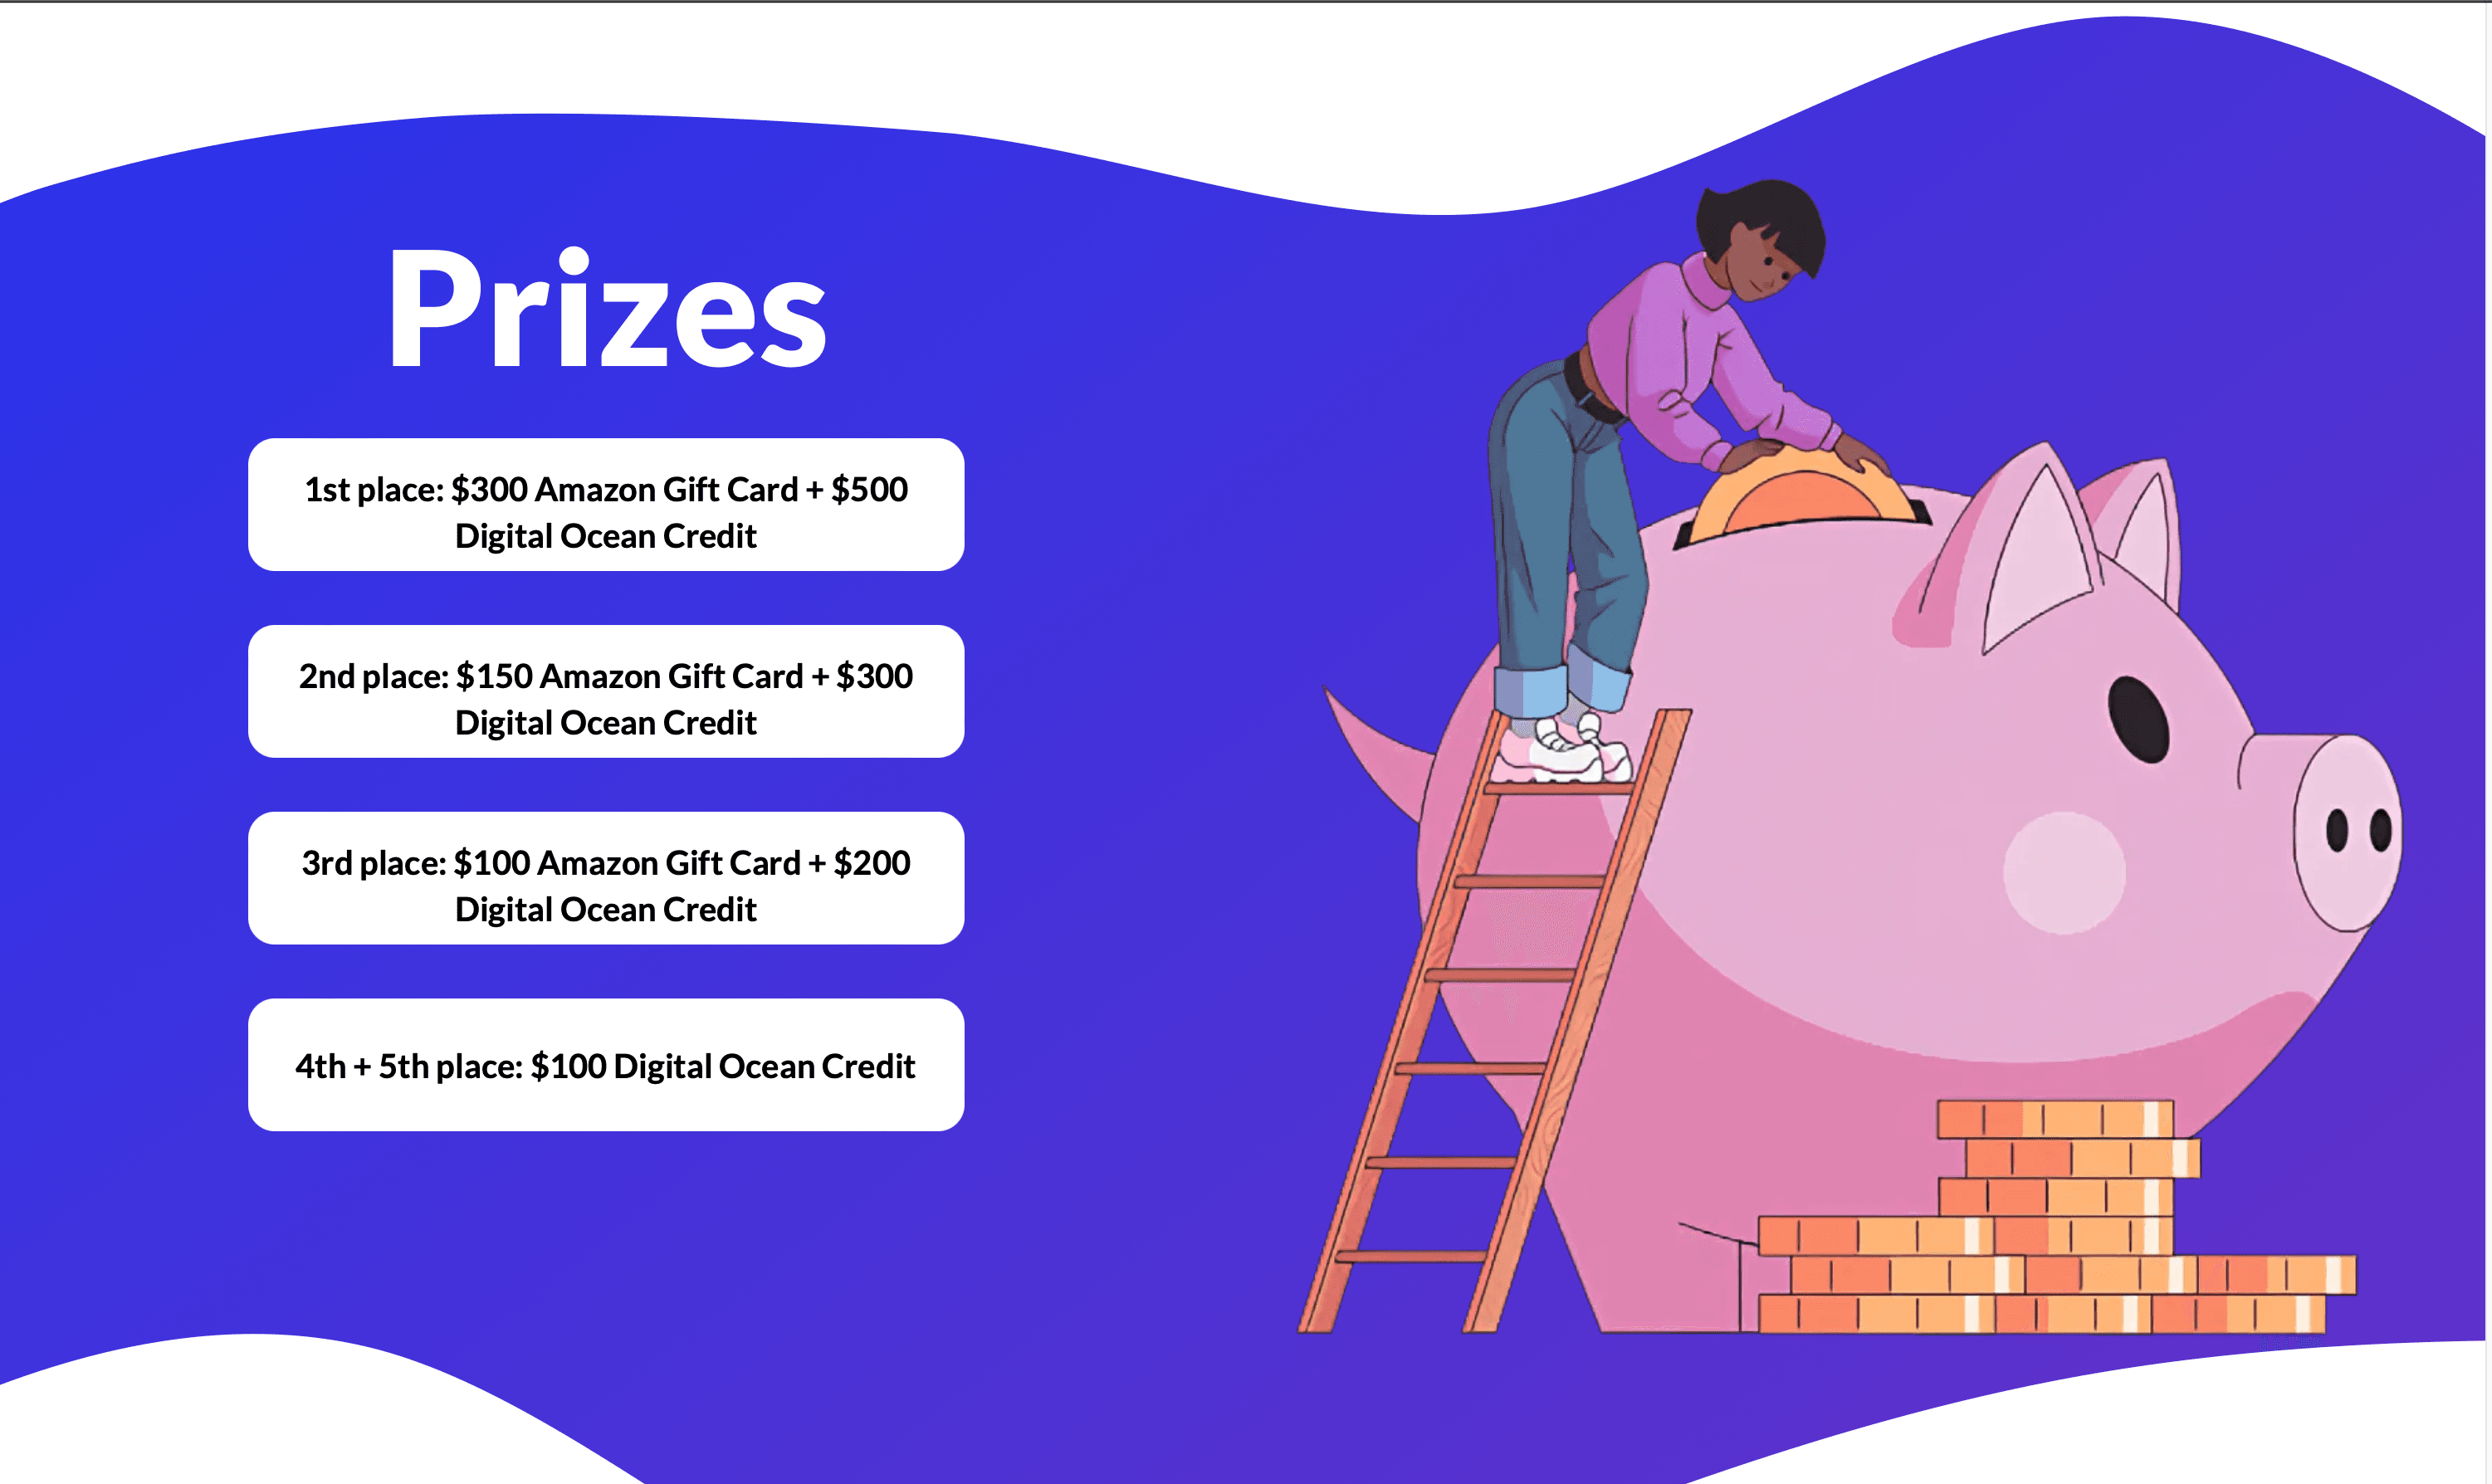 The prizes section of trivalleyhacks.org